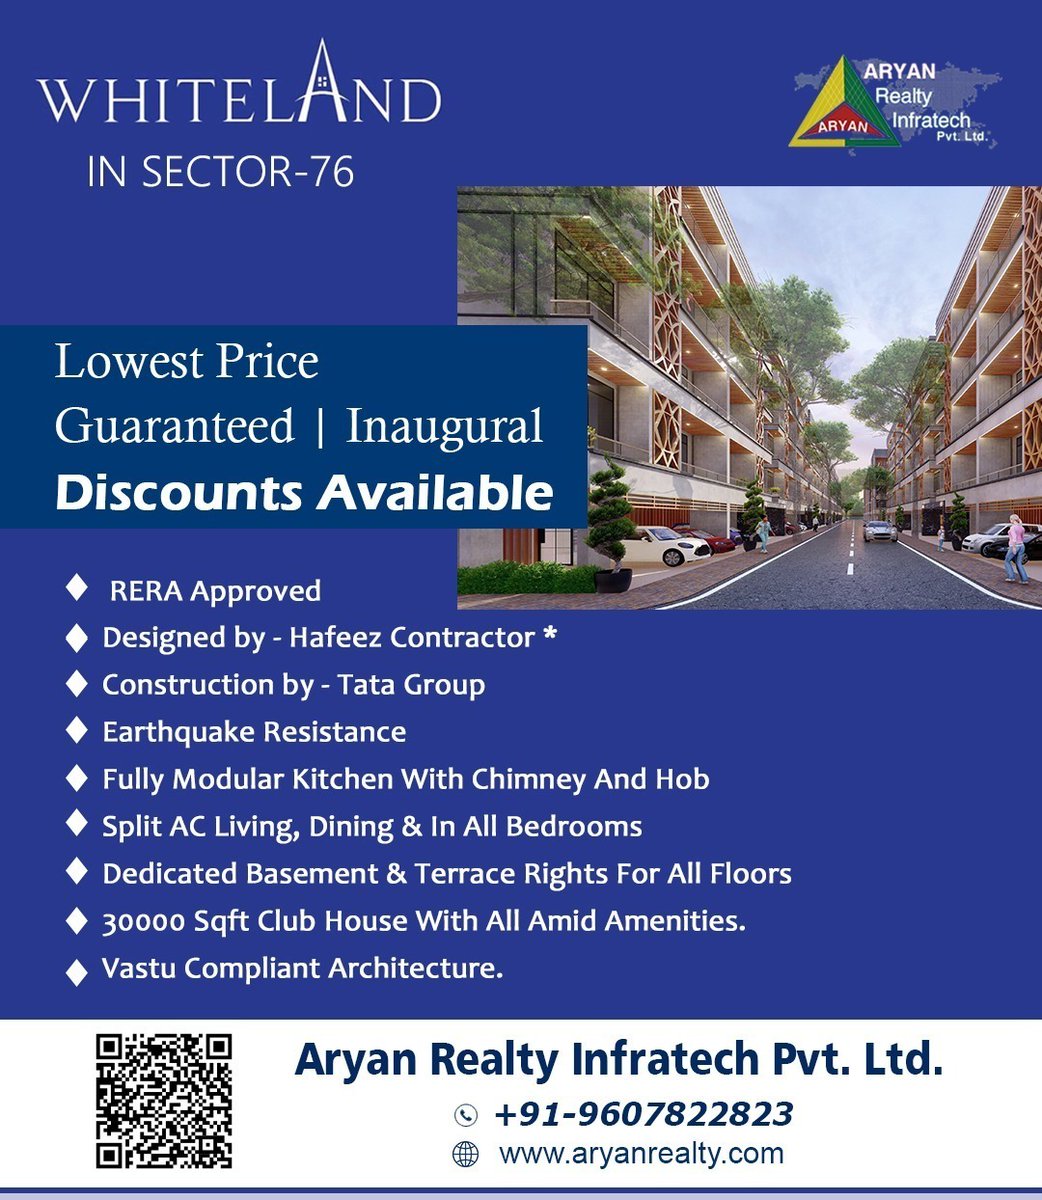 We are exclusive working with WHITELAND BLISSVILLE

Lowest Price Guaranteed | Inaugural 
Discount Available

Design By Hafeez Architech 
Construction By TATA

#aryanrealtyinfratech #whiteland #Launches #Sector76  #architecture #luxury  #newhome #property #Gurgaon #Sector76Gurgaon